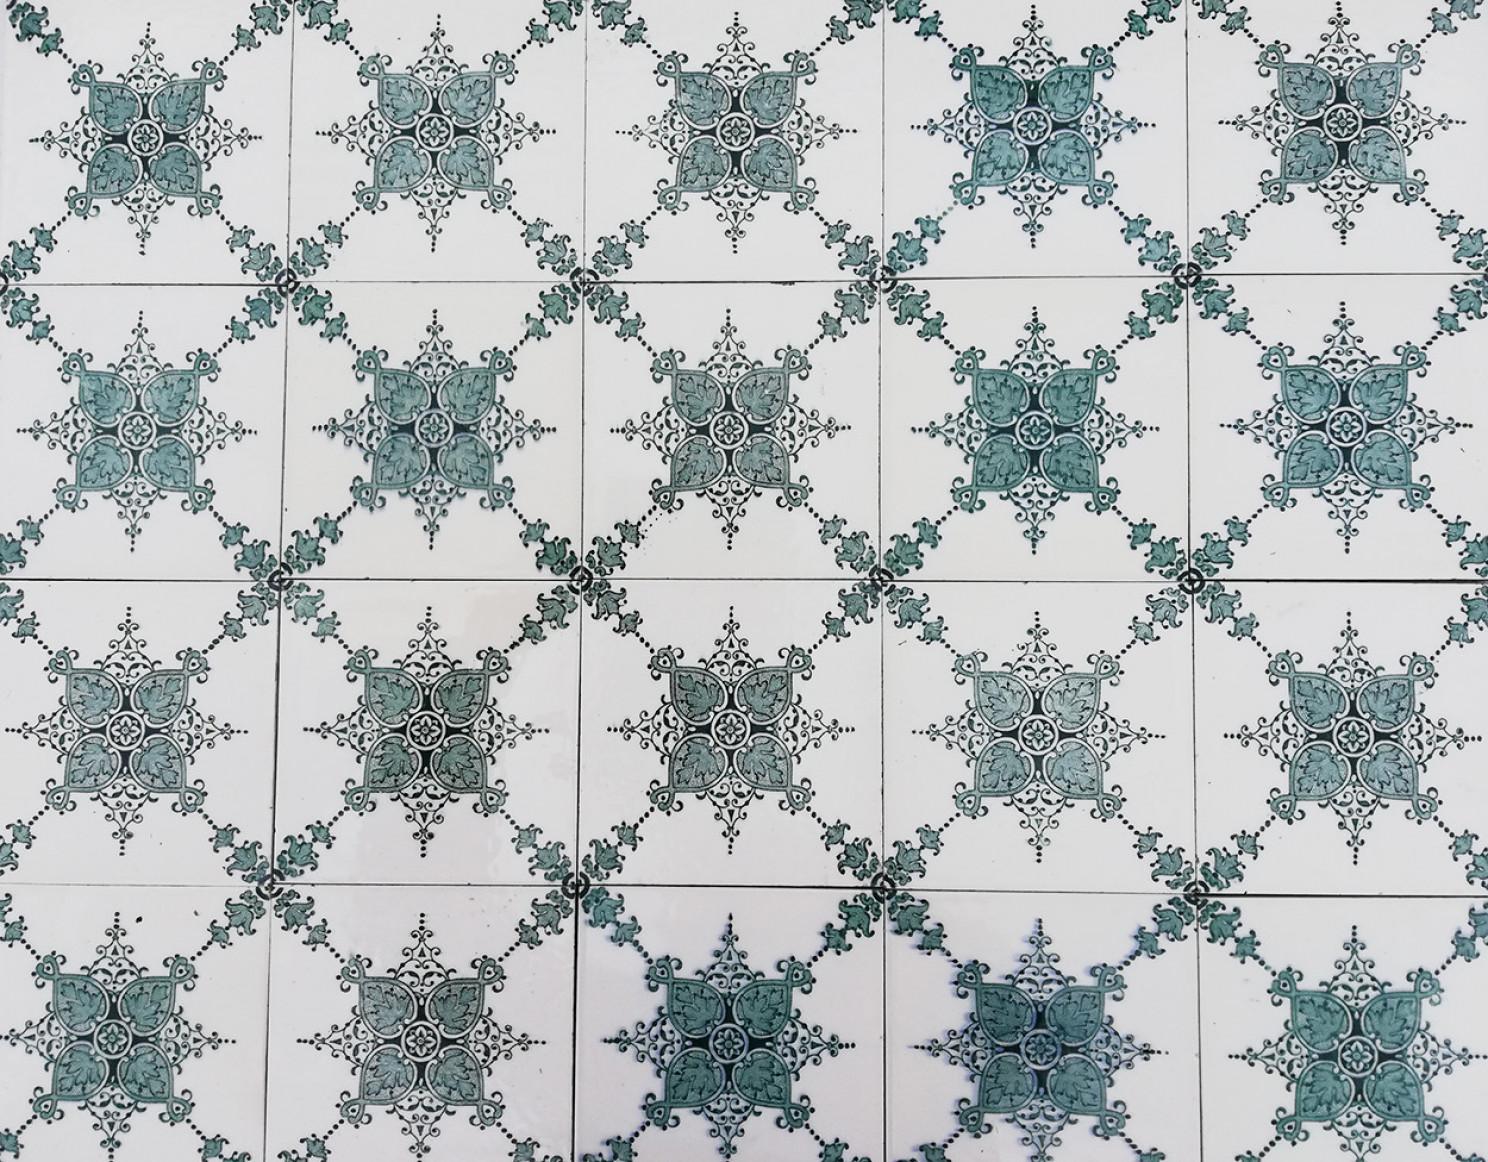 A large set of unique antique tiles, blue and dark green colored with a beautiful Art Deco pattern, Societe Morialme circa 1920, Belgium. On the tiles is in dark green and blue paint a beautiful, symmetrical floral design and pattern visible. These